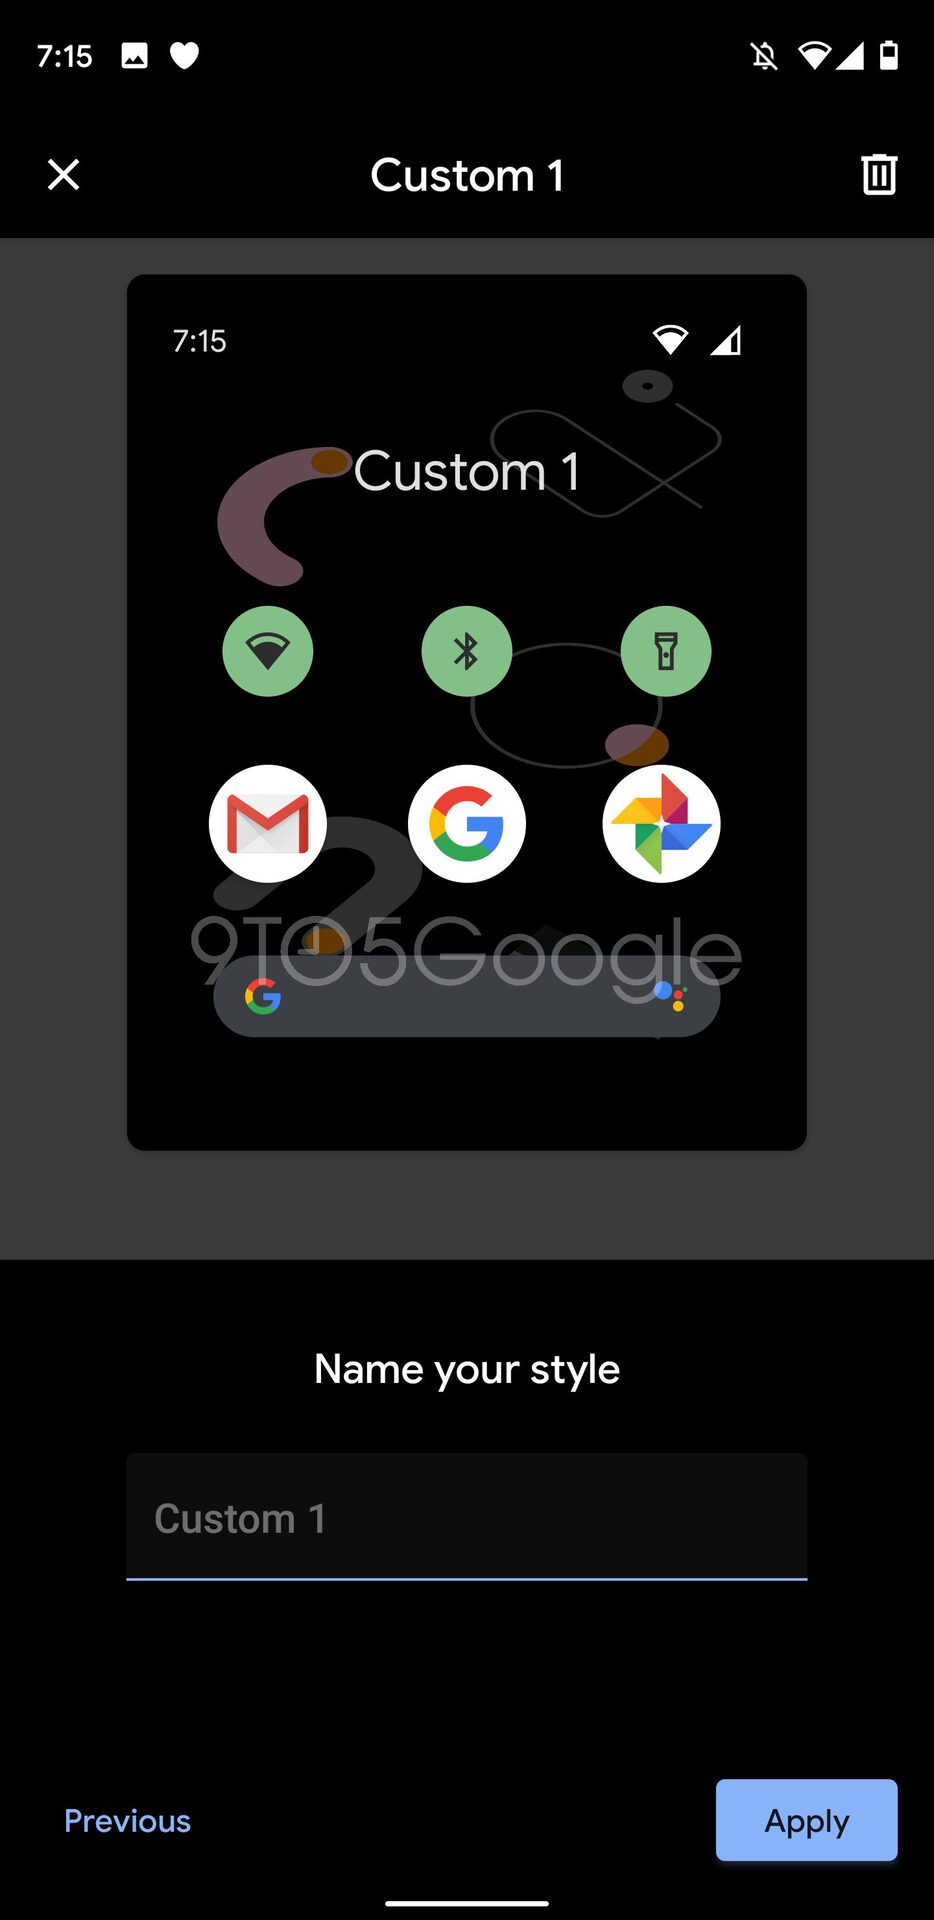 The Google Styles and Wallpapers app, via 9to5Google.